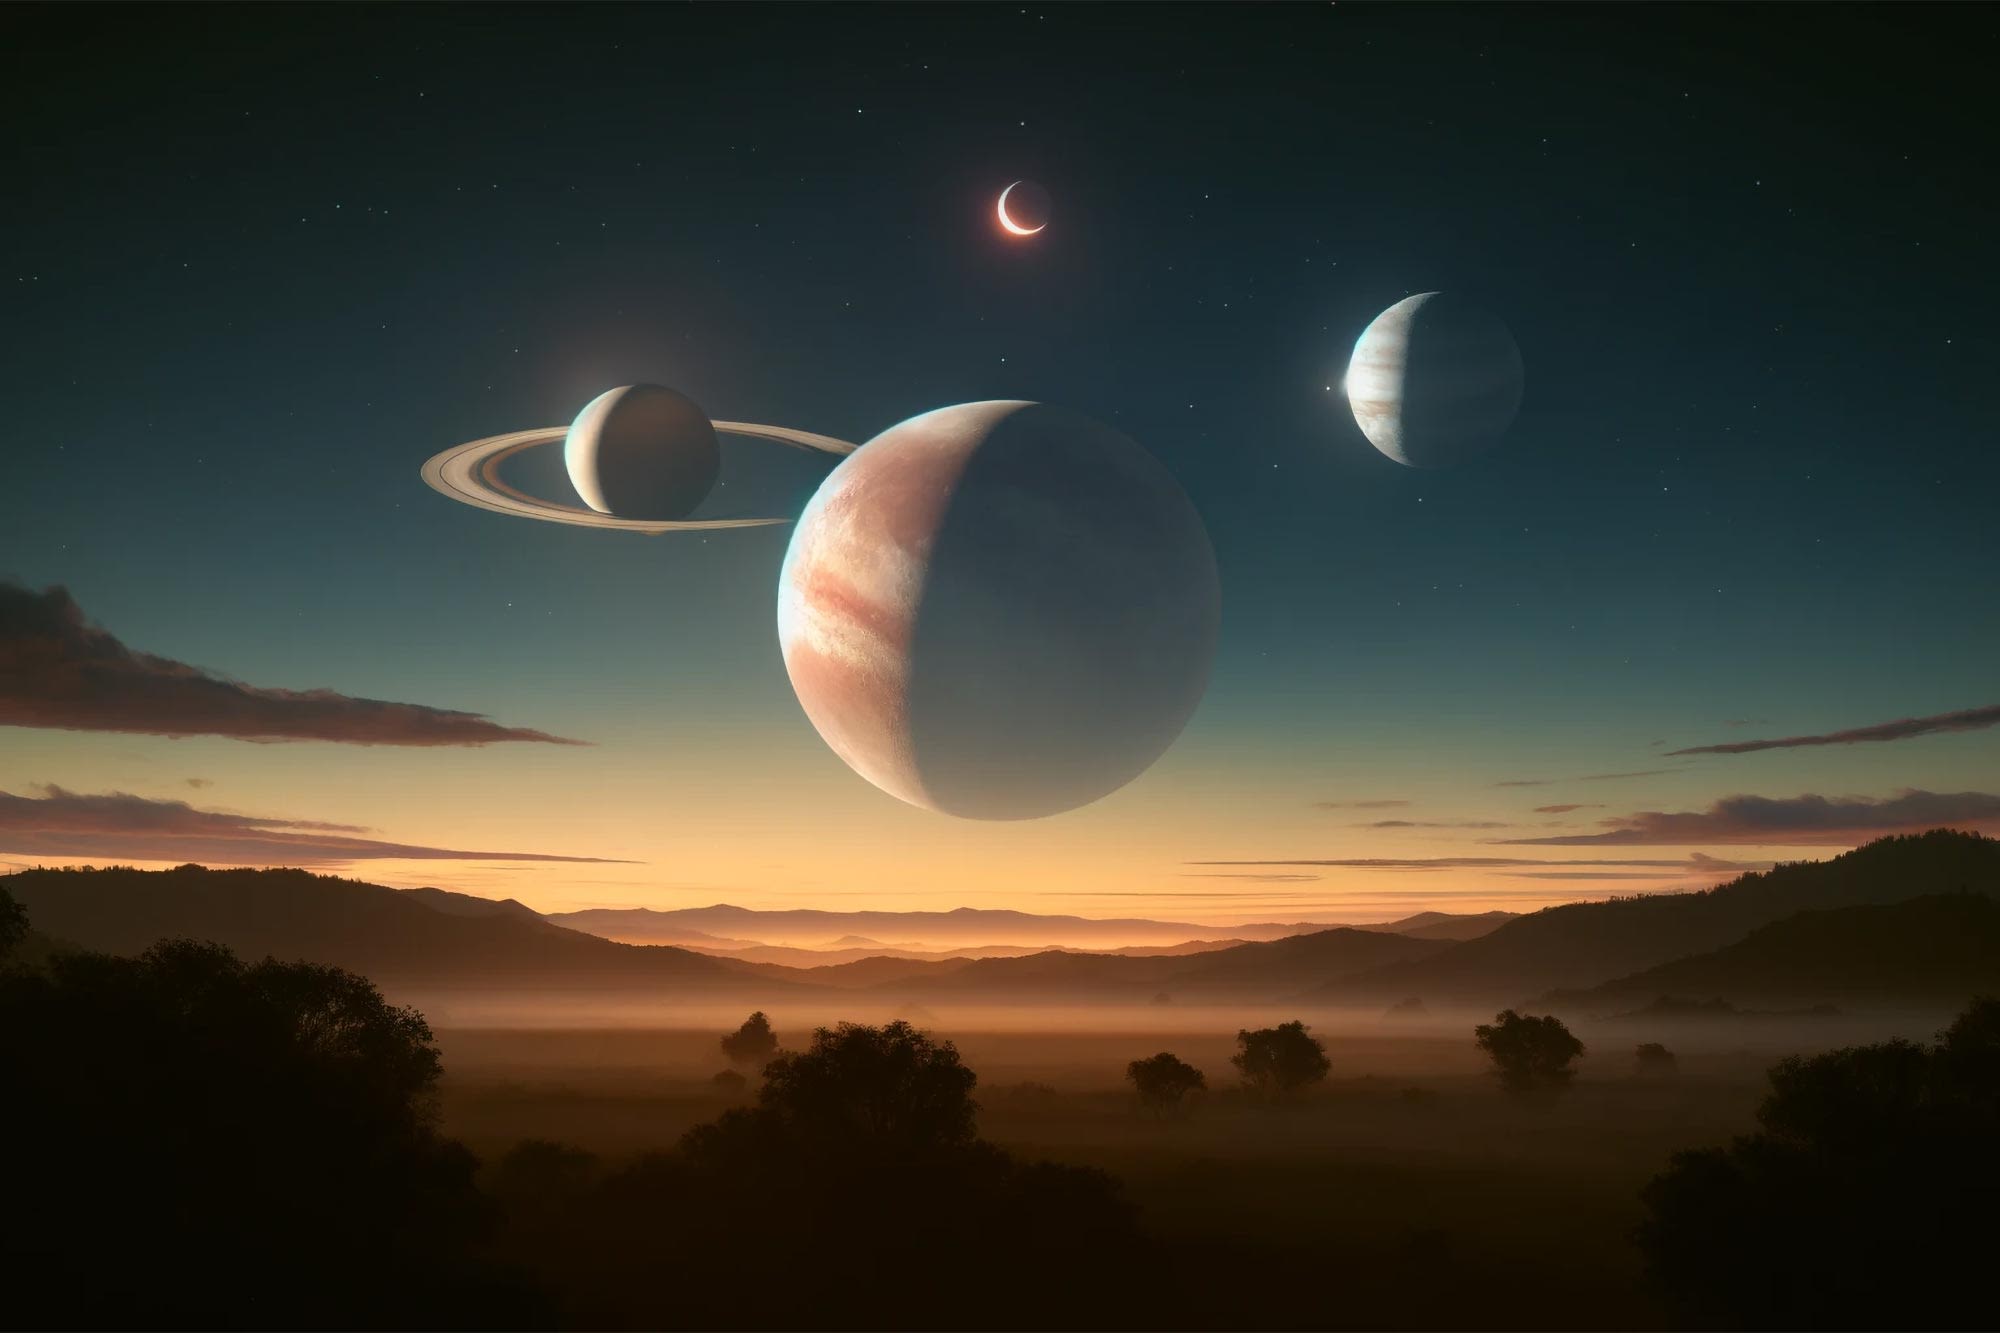 Don’t Miss: Planets Dominate the Morning Sky